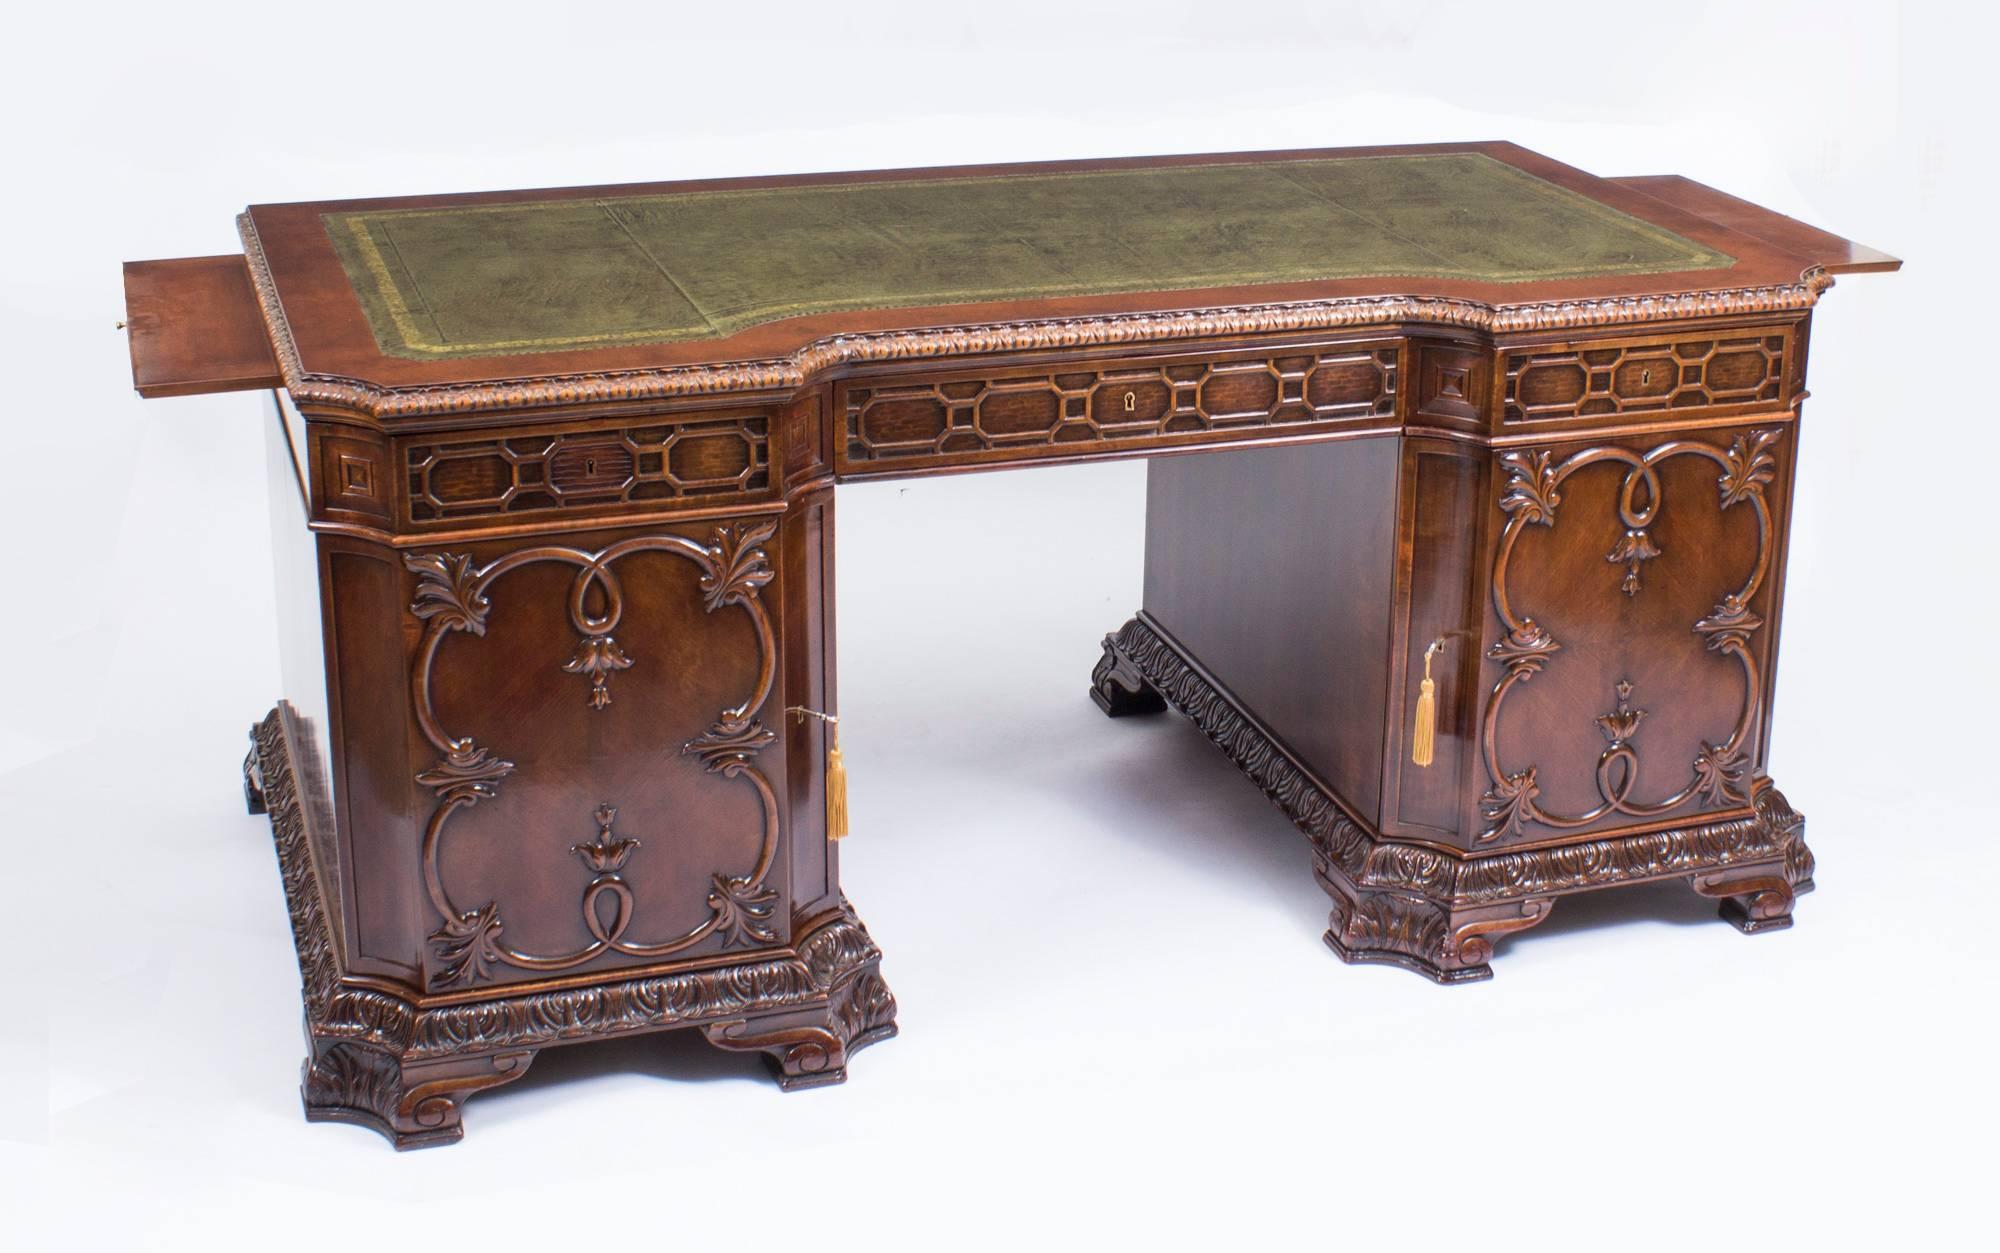 This is a superb antique Chippendale style mahogany pedestal kneehole desk, circa 1880 in date.

It is made from fabulous quality mahogany, the inverted shaped top has an acanthus moulded edge with an olive green gold tooled leather inset with a